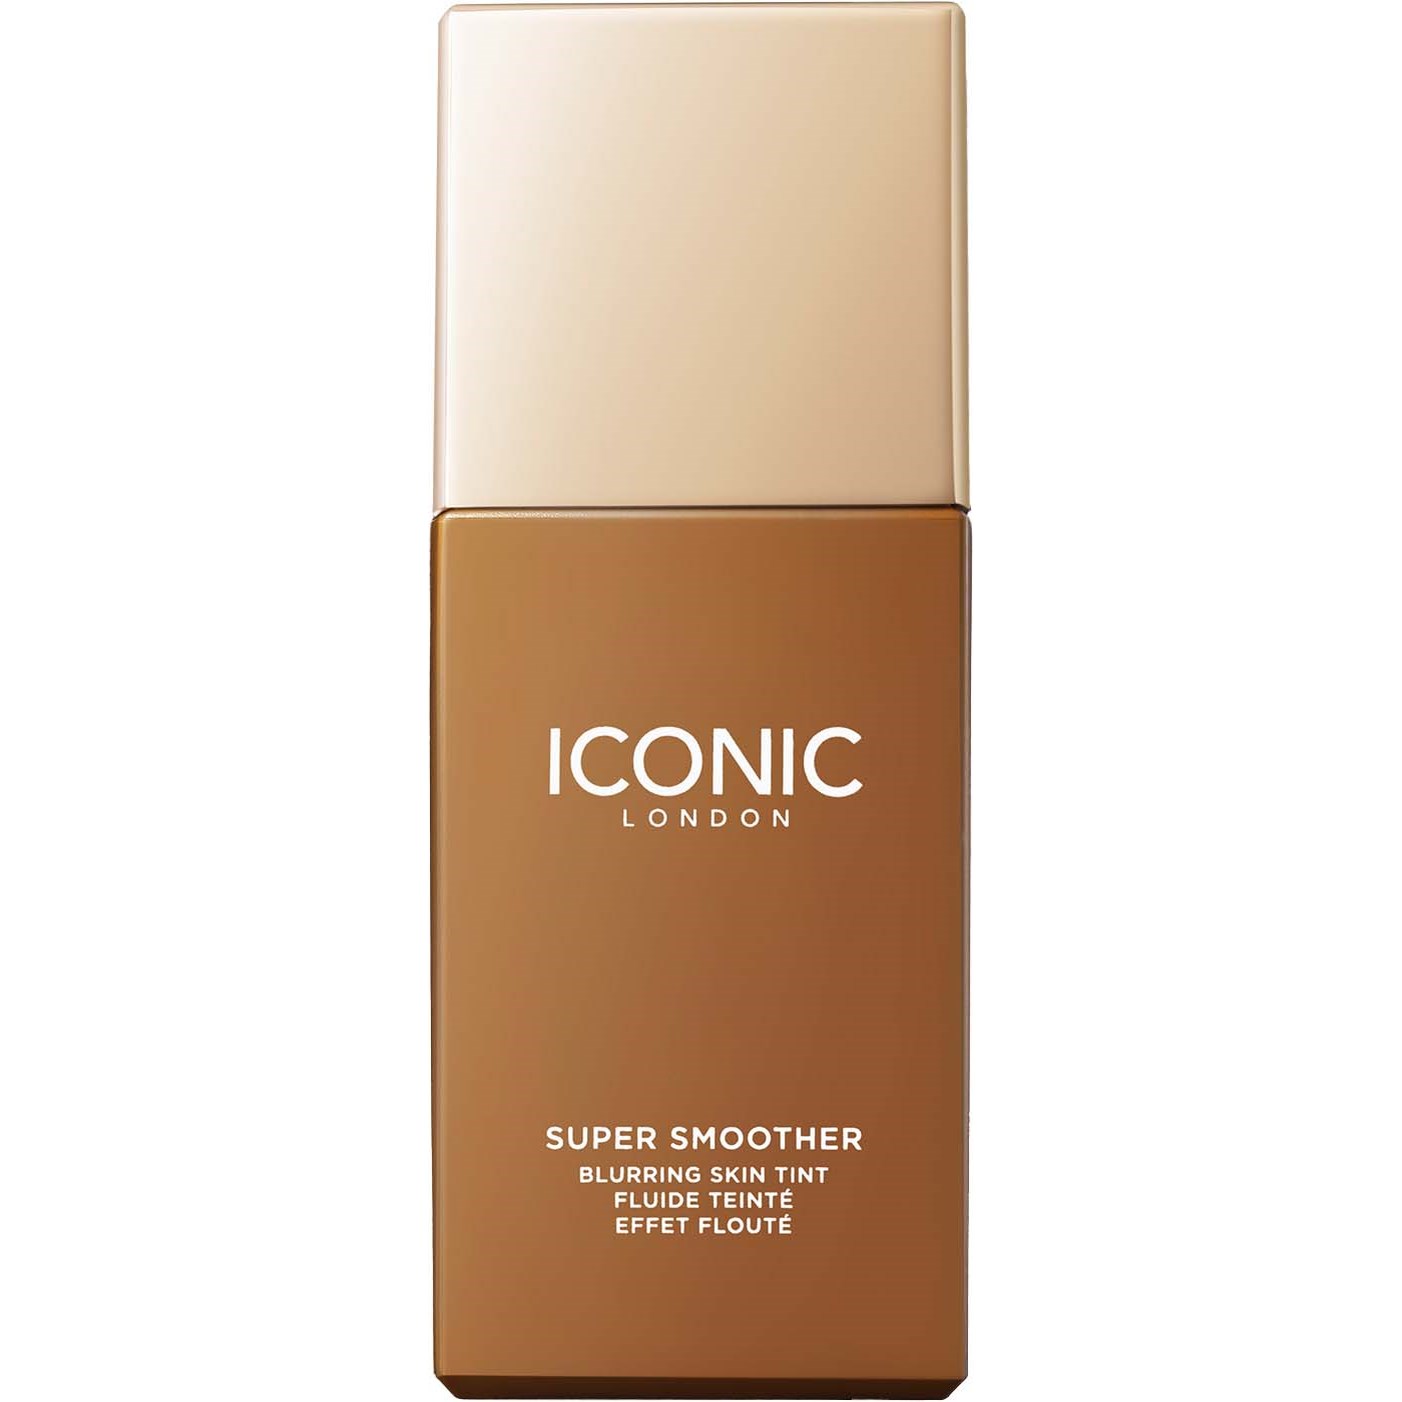 ICONIC London Super Smoother Blurring Skin Tint Neutral Deep